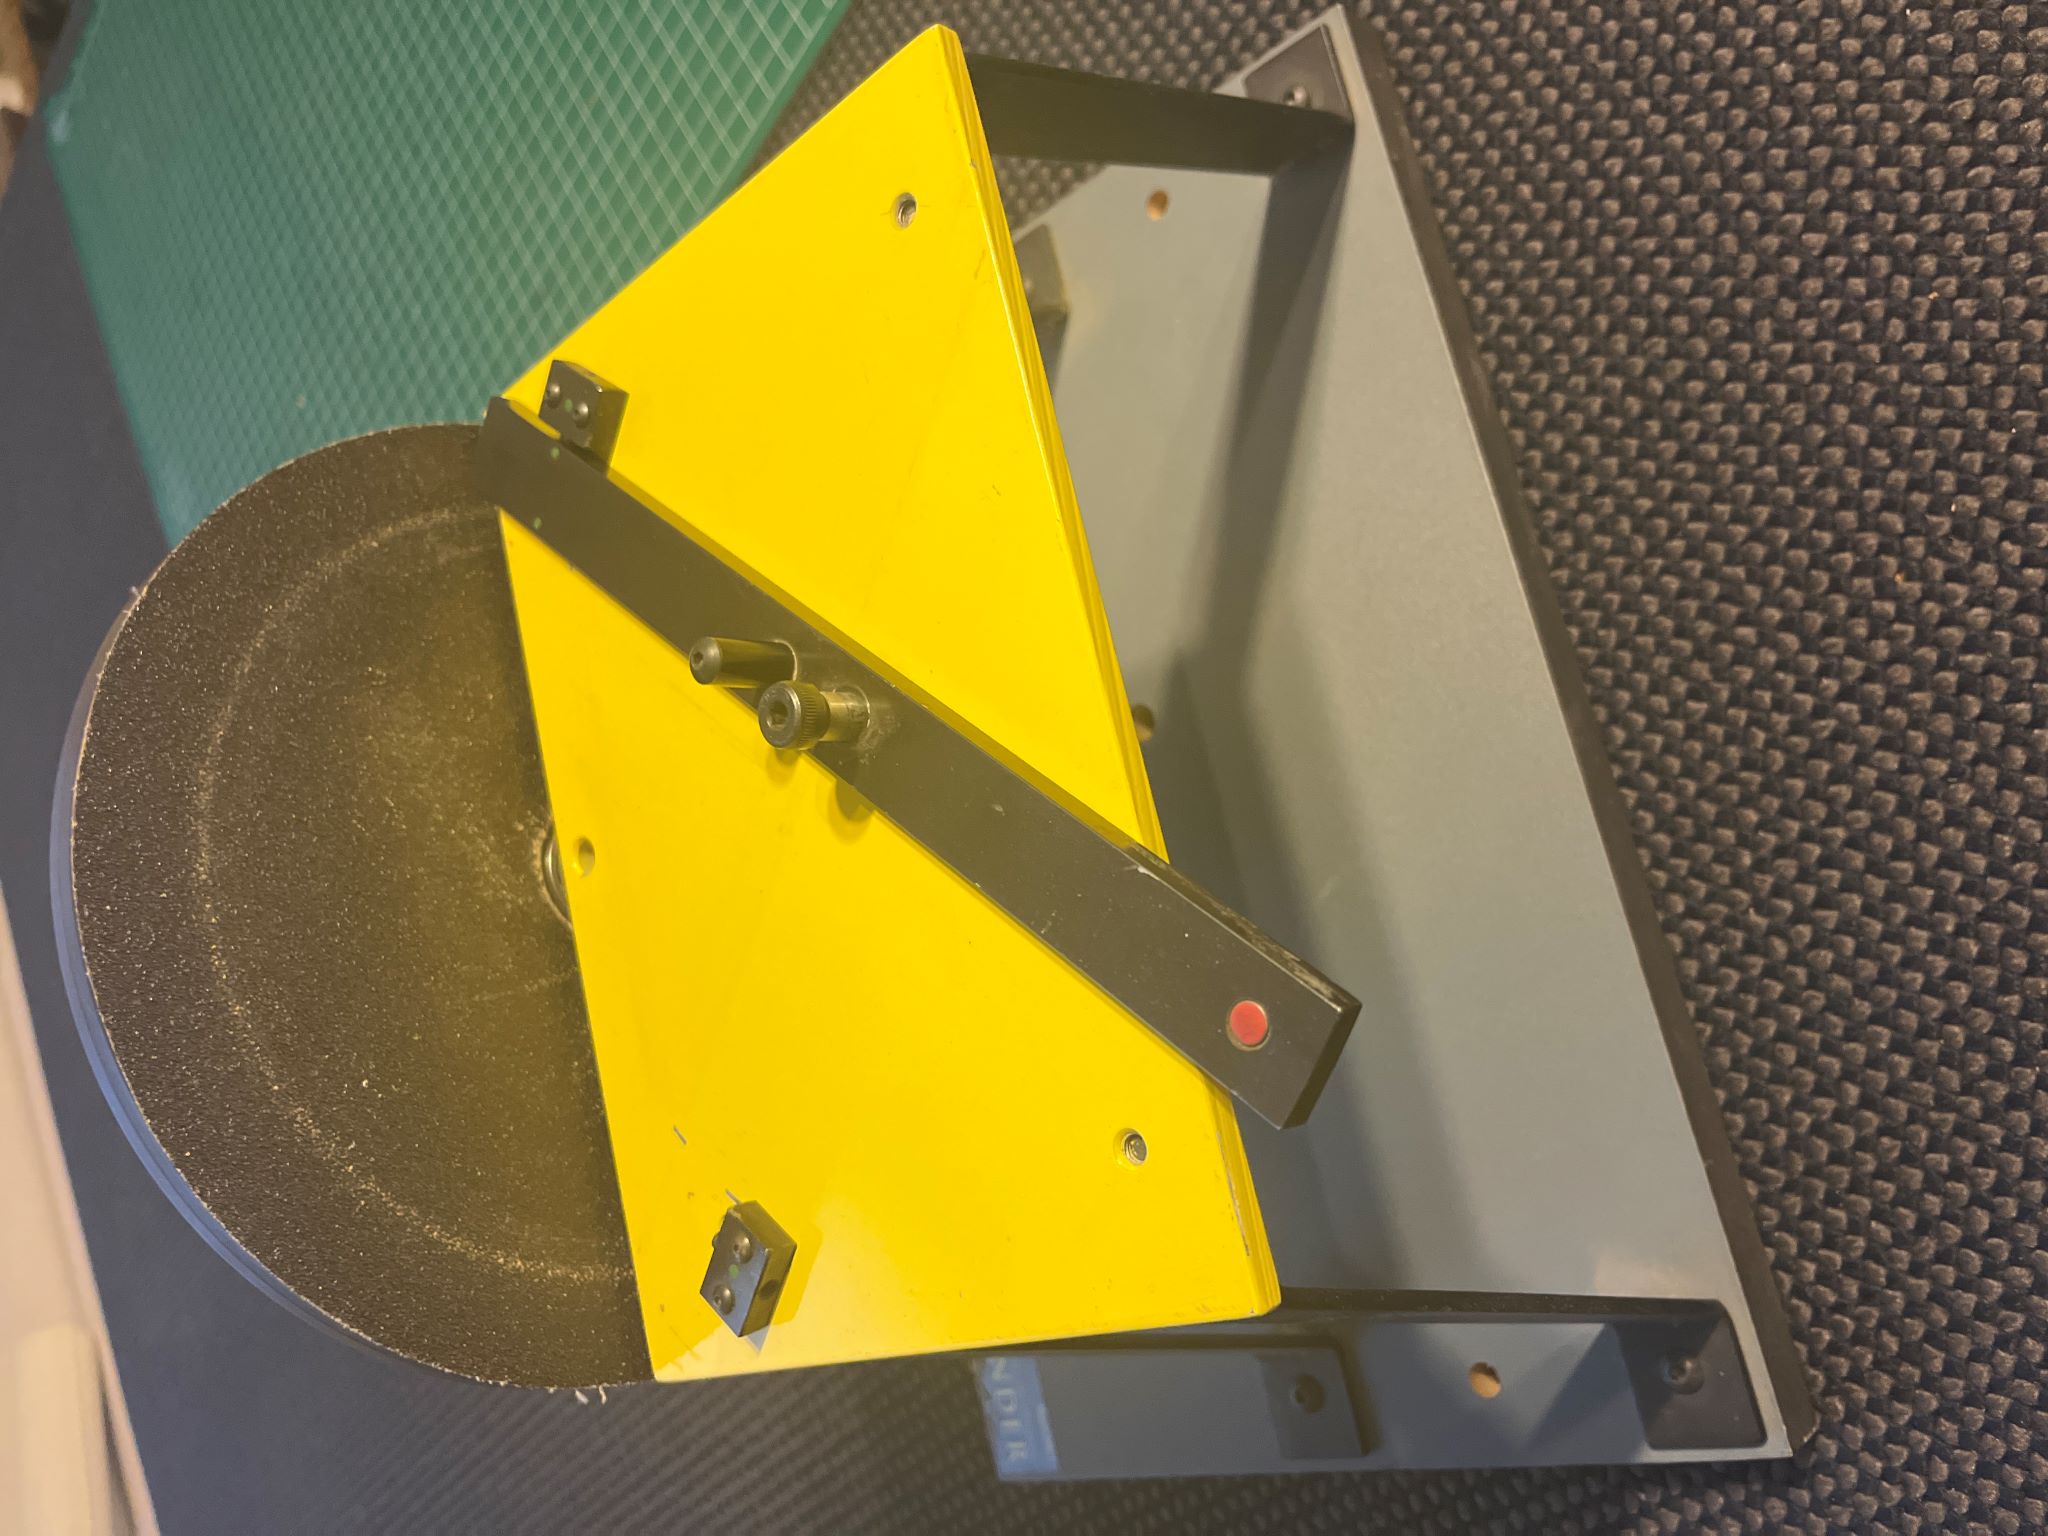 Equipment Lot: Frame Square Miter Saw, Logan Miter Sander, Dahle 585 Large Format Guillotine Paper Cutter, Keencut Ultimat Gold Mat Cutter, & Seal Masterpiece 500-T/500T (Used) Item # UE-083123A